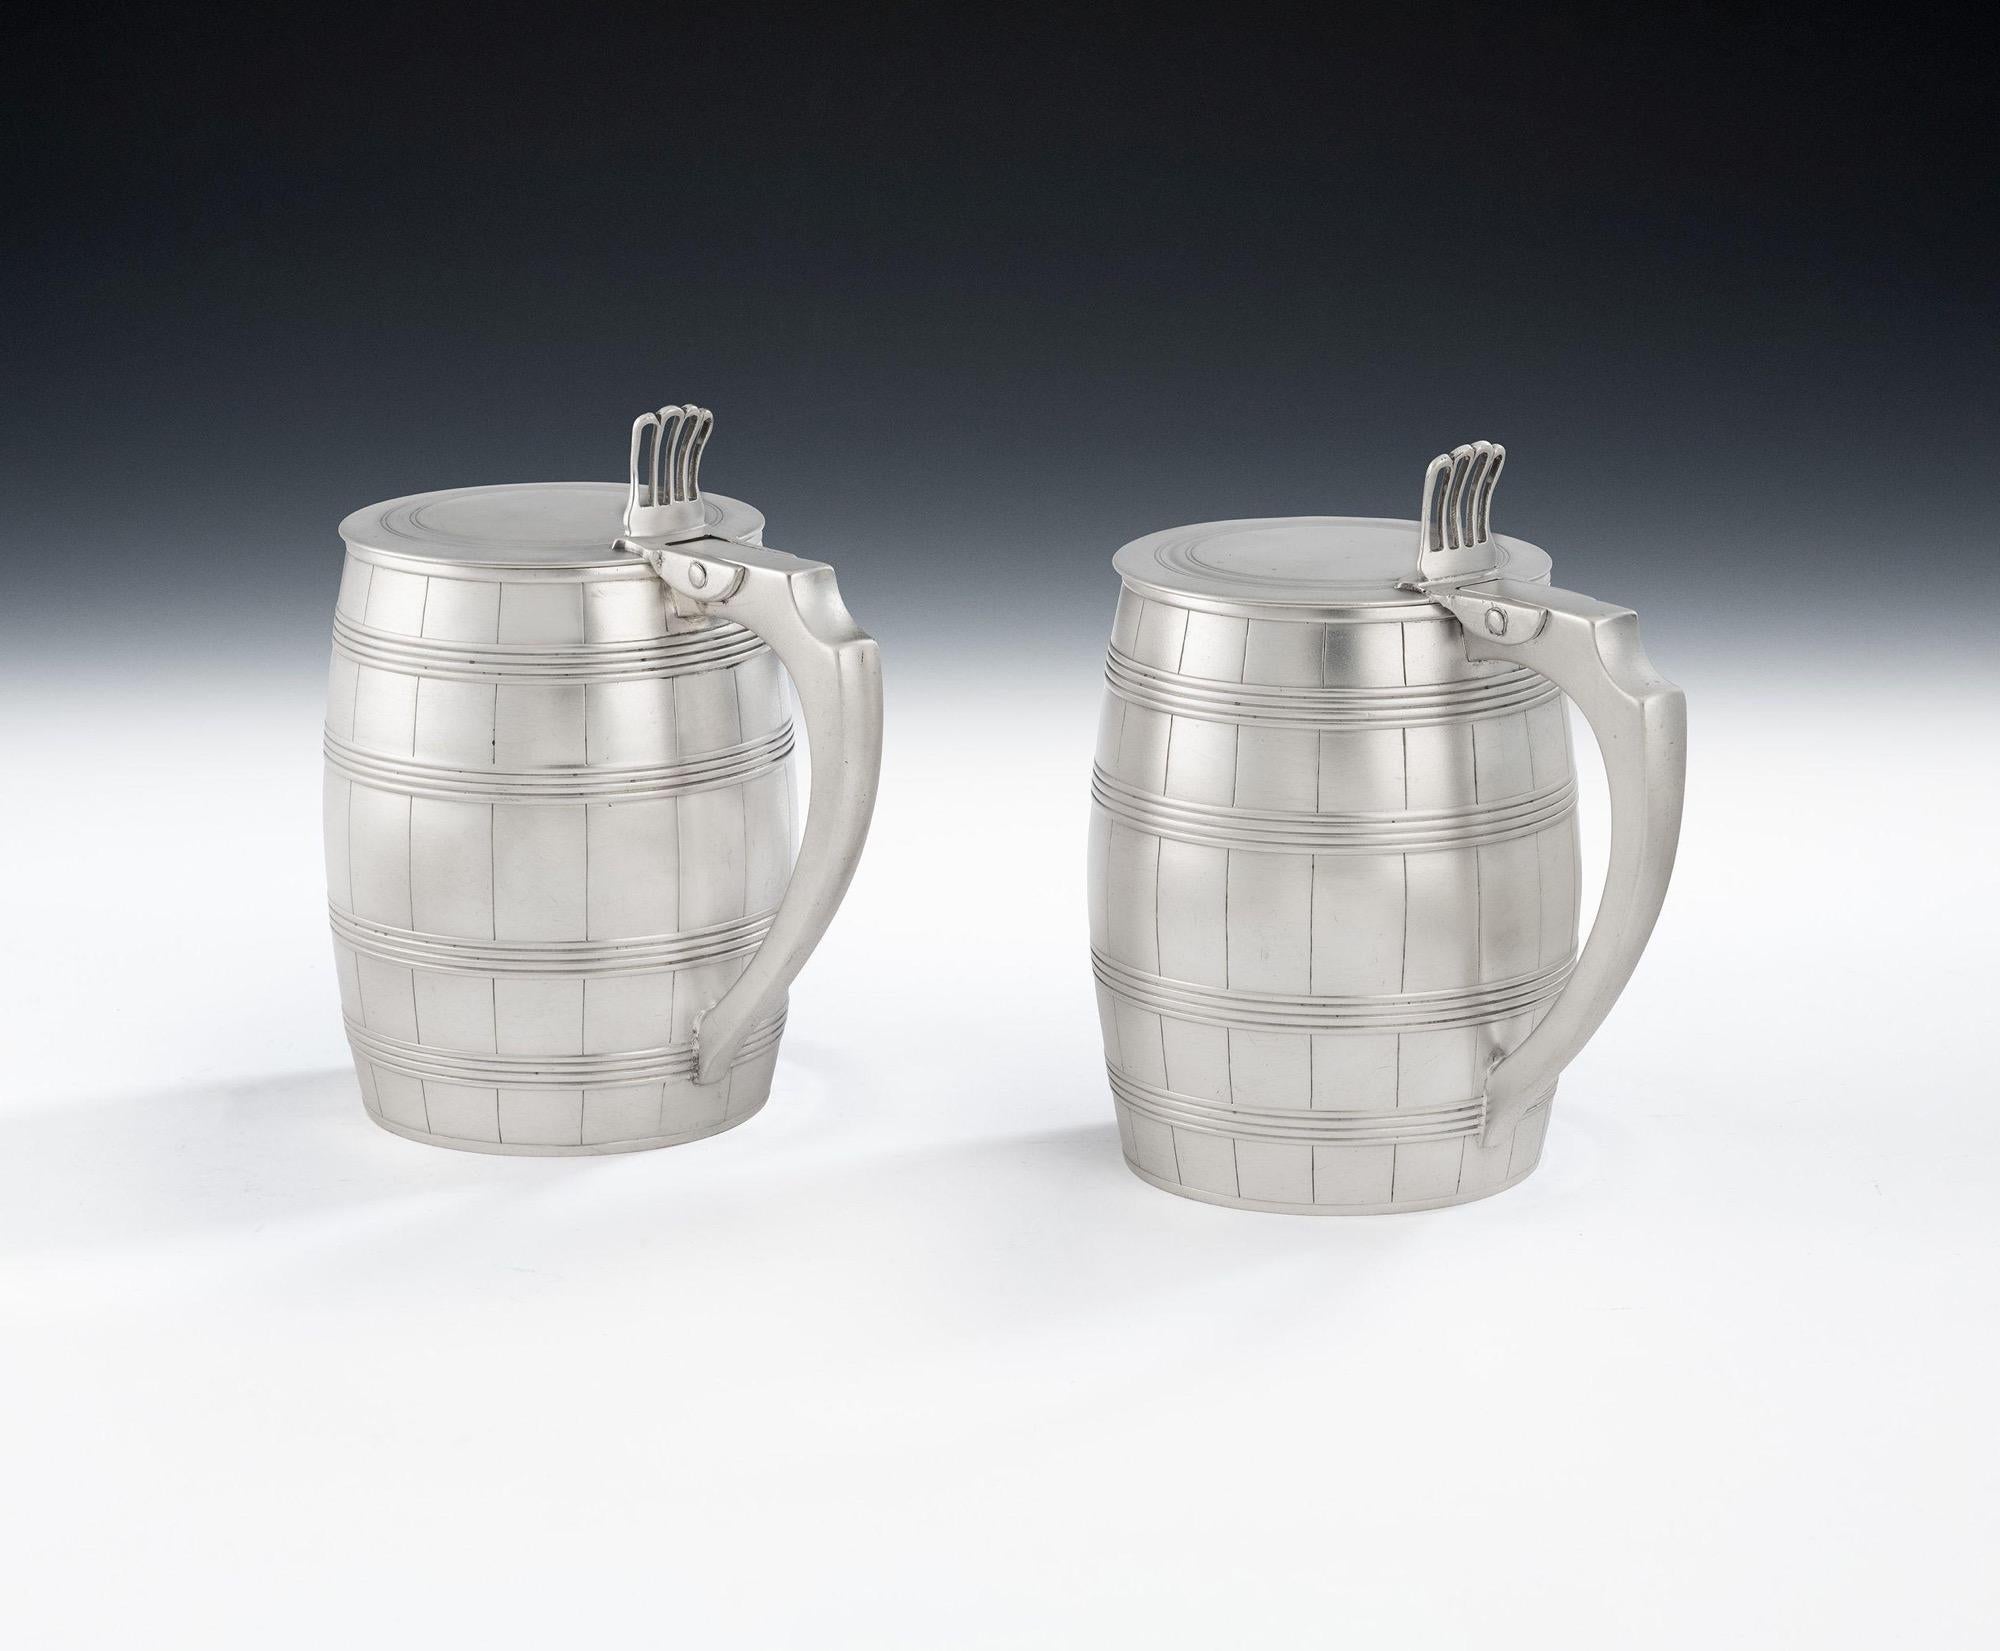  Pair of George III Covered Barrel Tankards by William Bennett, 1789 In Good Condition For Sale In London, GB